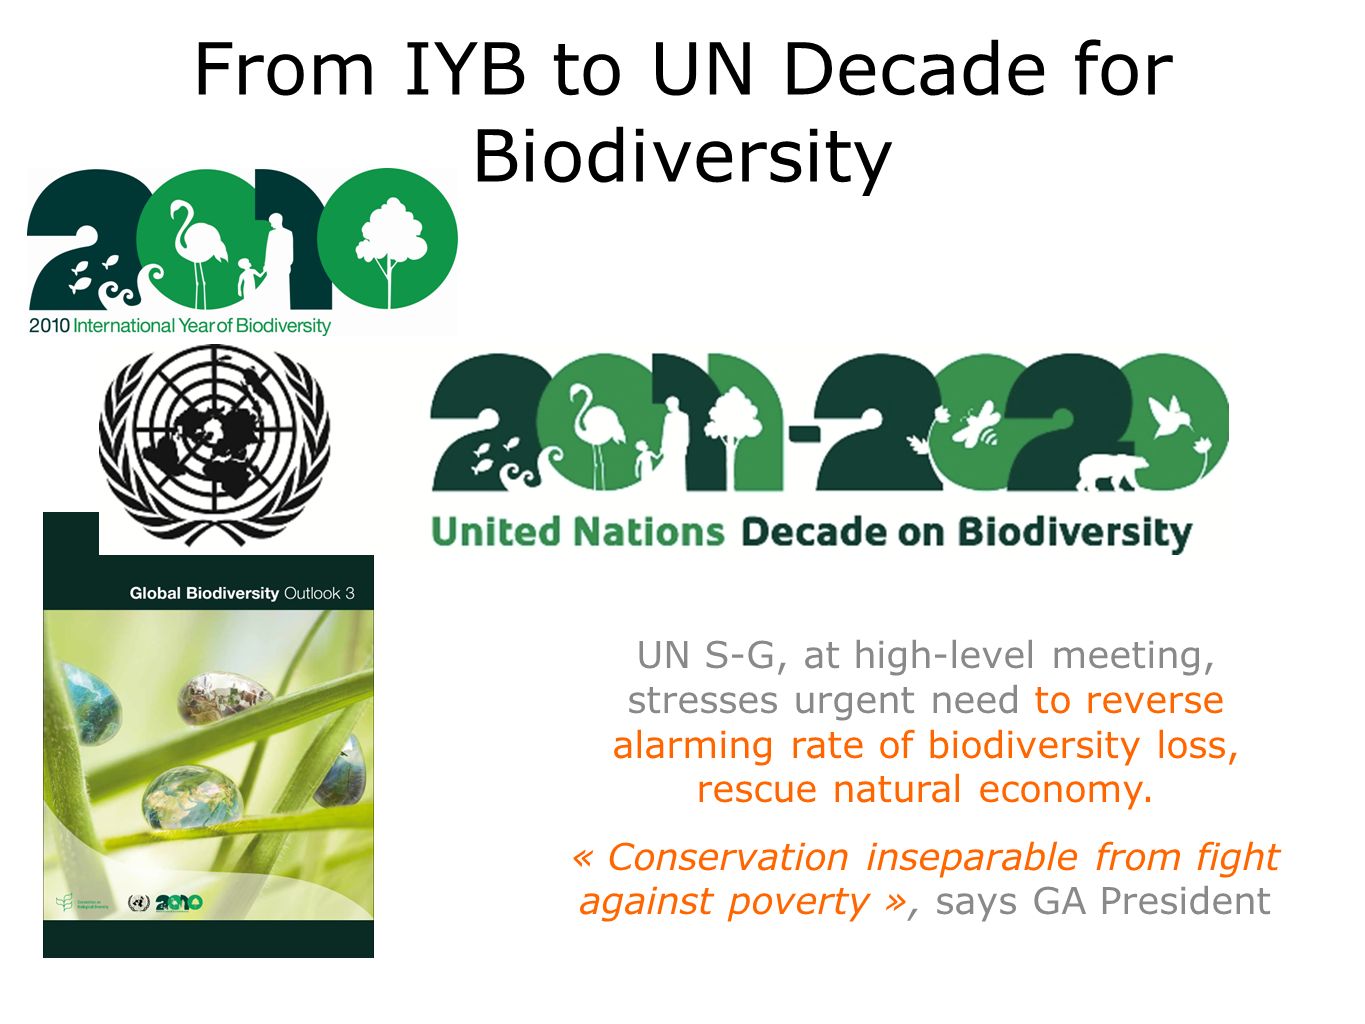 From IYB to UN Decade for Biodiversity UN S-G, at high-level meeting, stresses urgent need to reverse alarming rate of biodiversity loss, rescue natural economy.